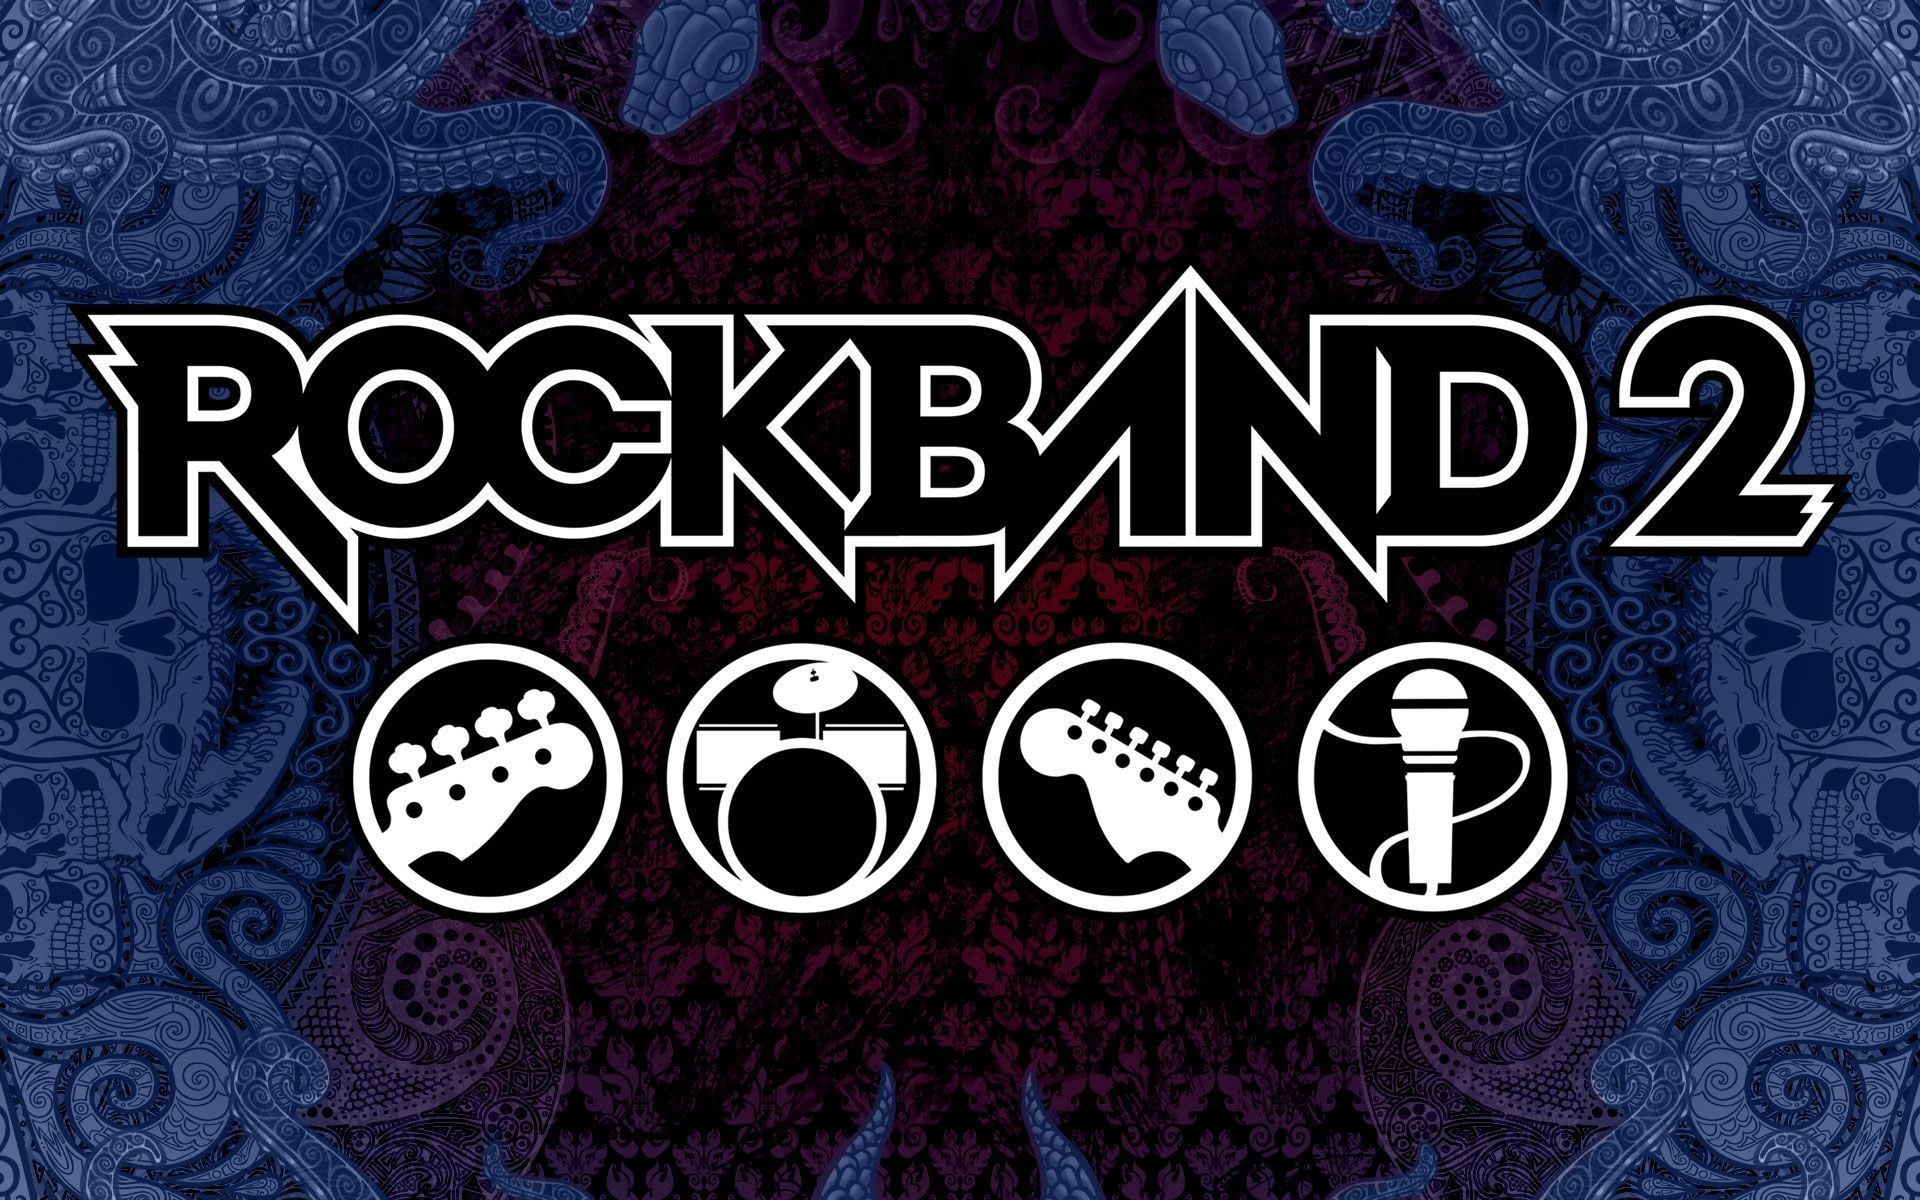 1920x1200 Rock Band 2 game wallpaper Wallpapers - HD Wallpapers 84197